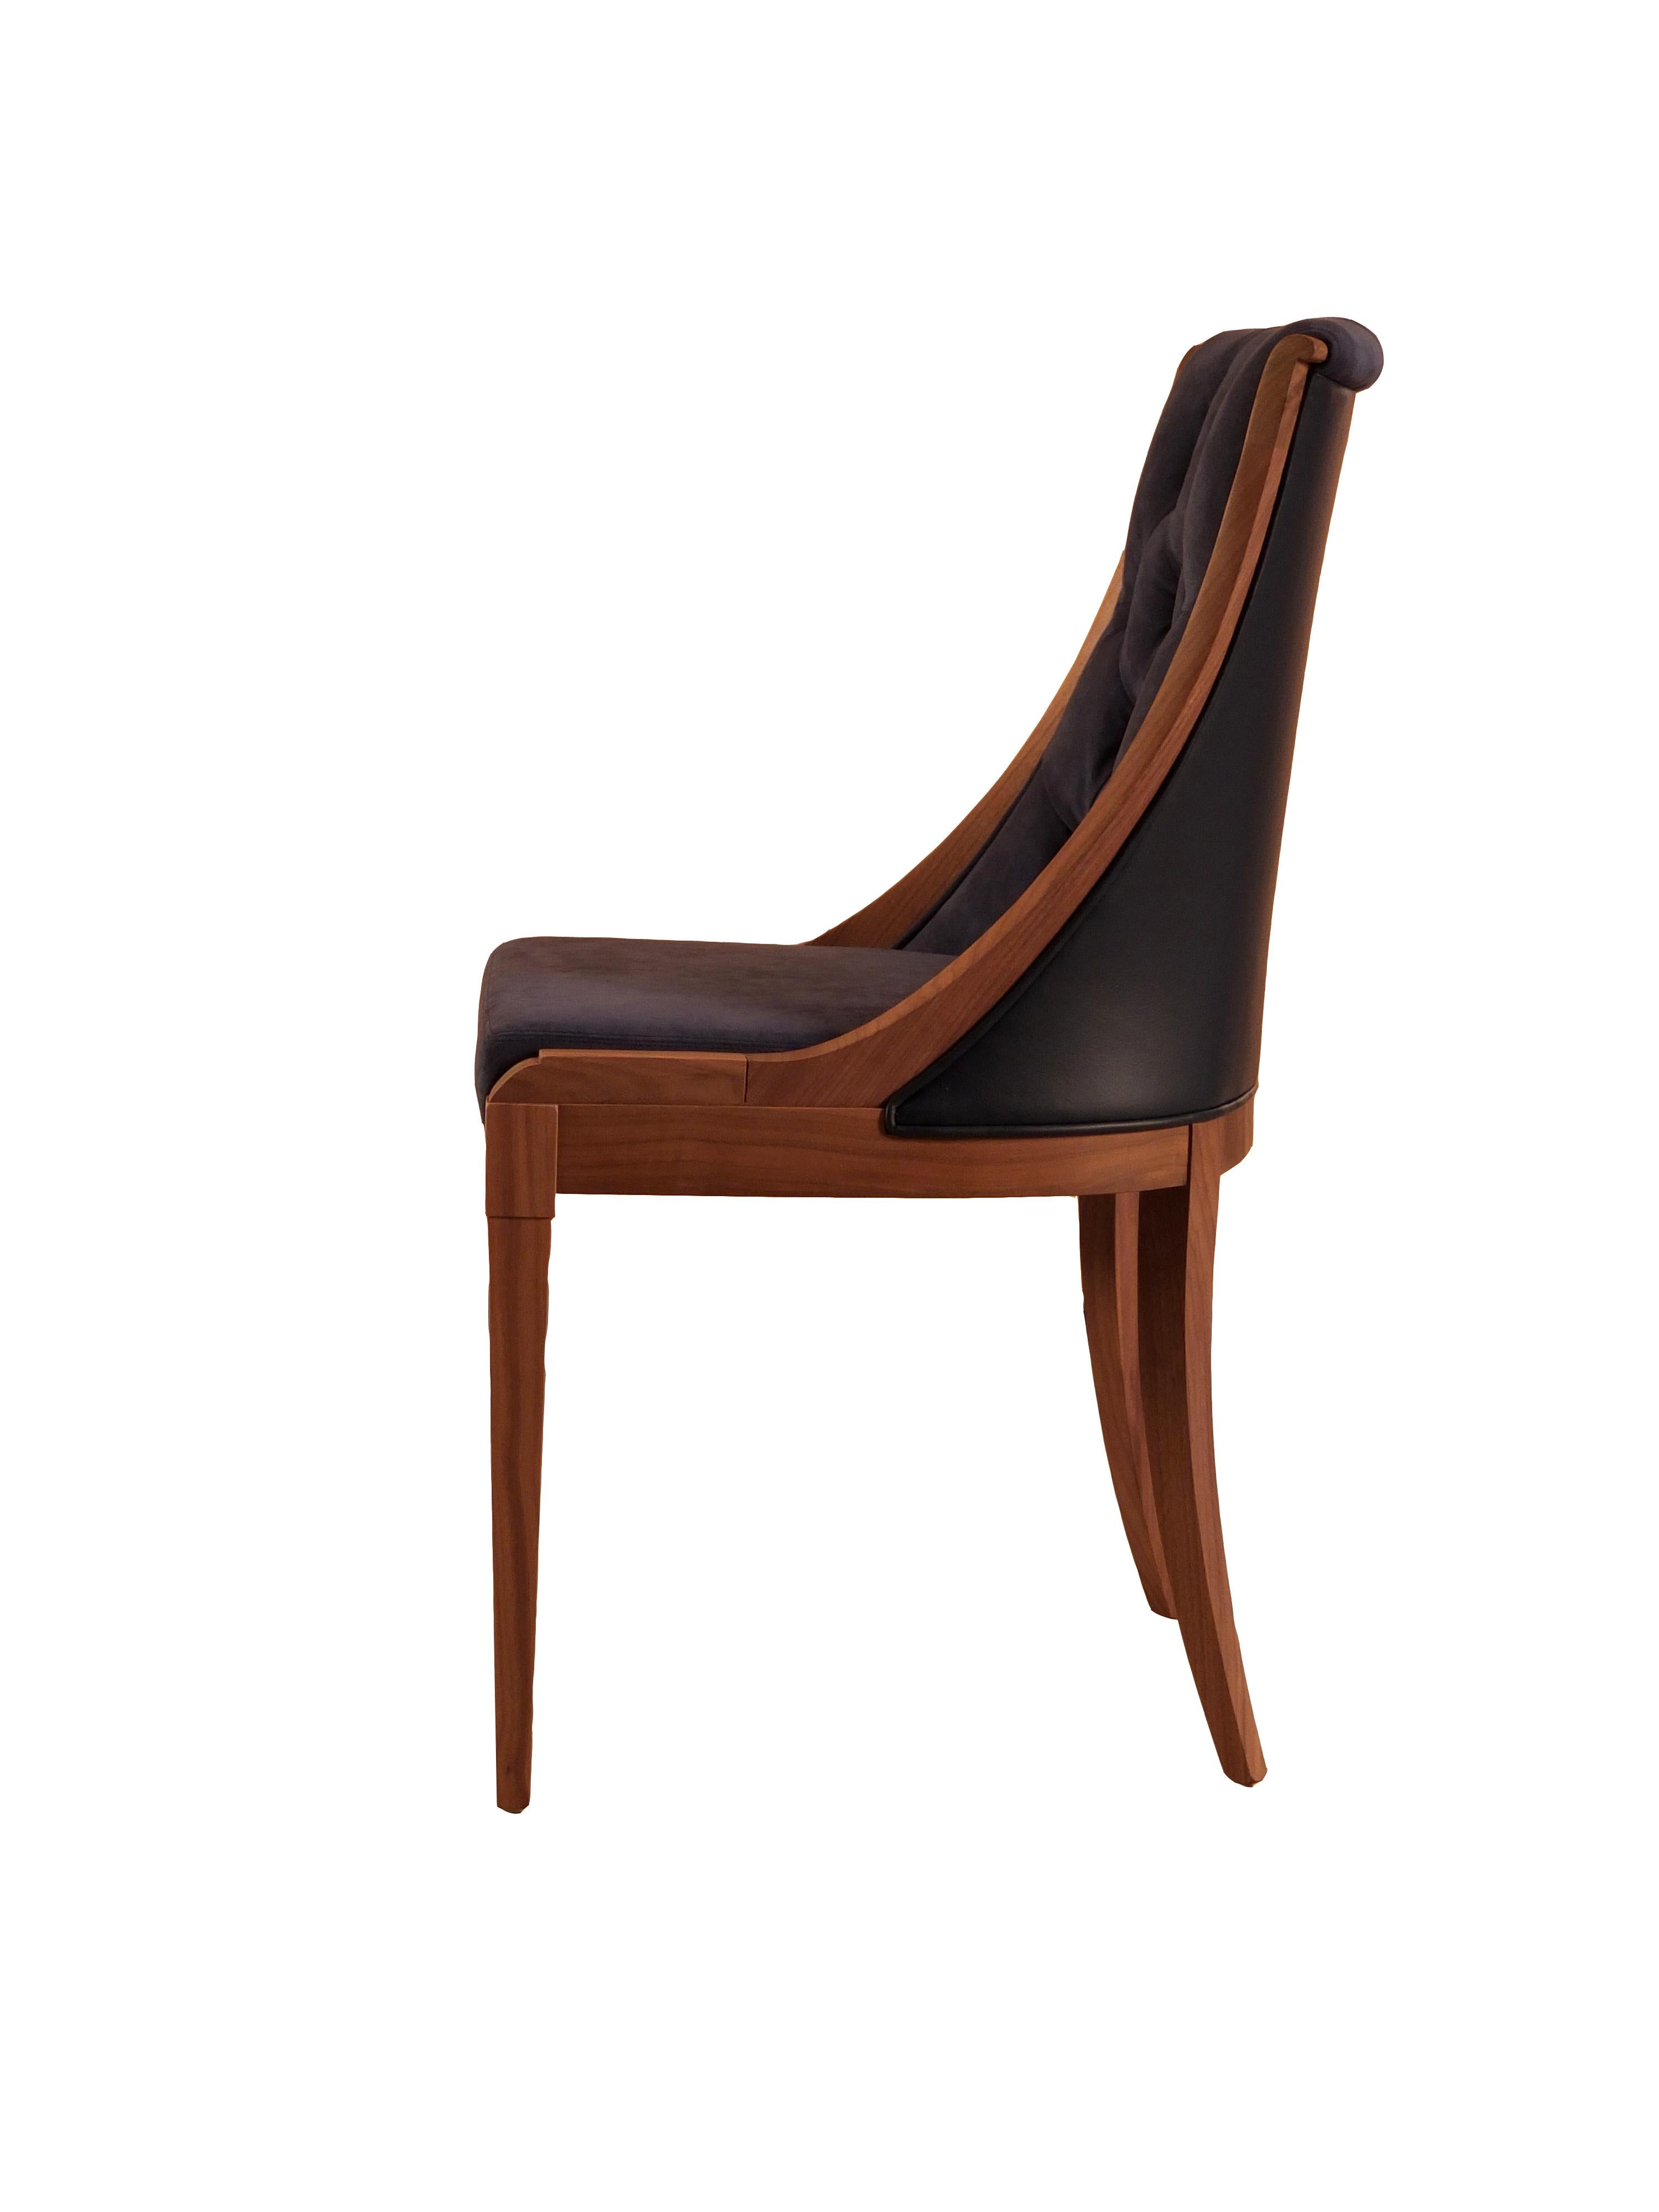 Biedermeier Musa, Upholstered Chair Made of Cherrywood For Sale